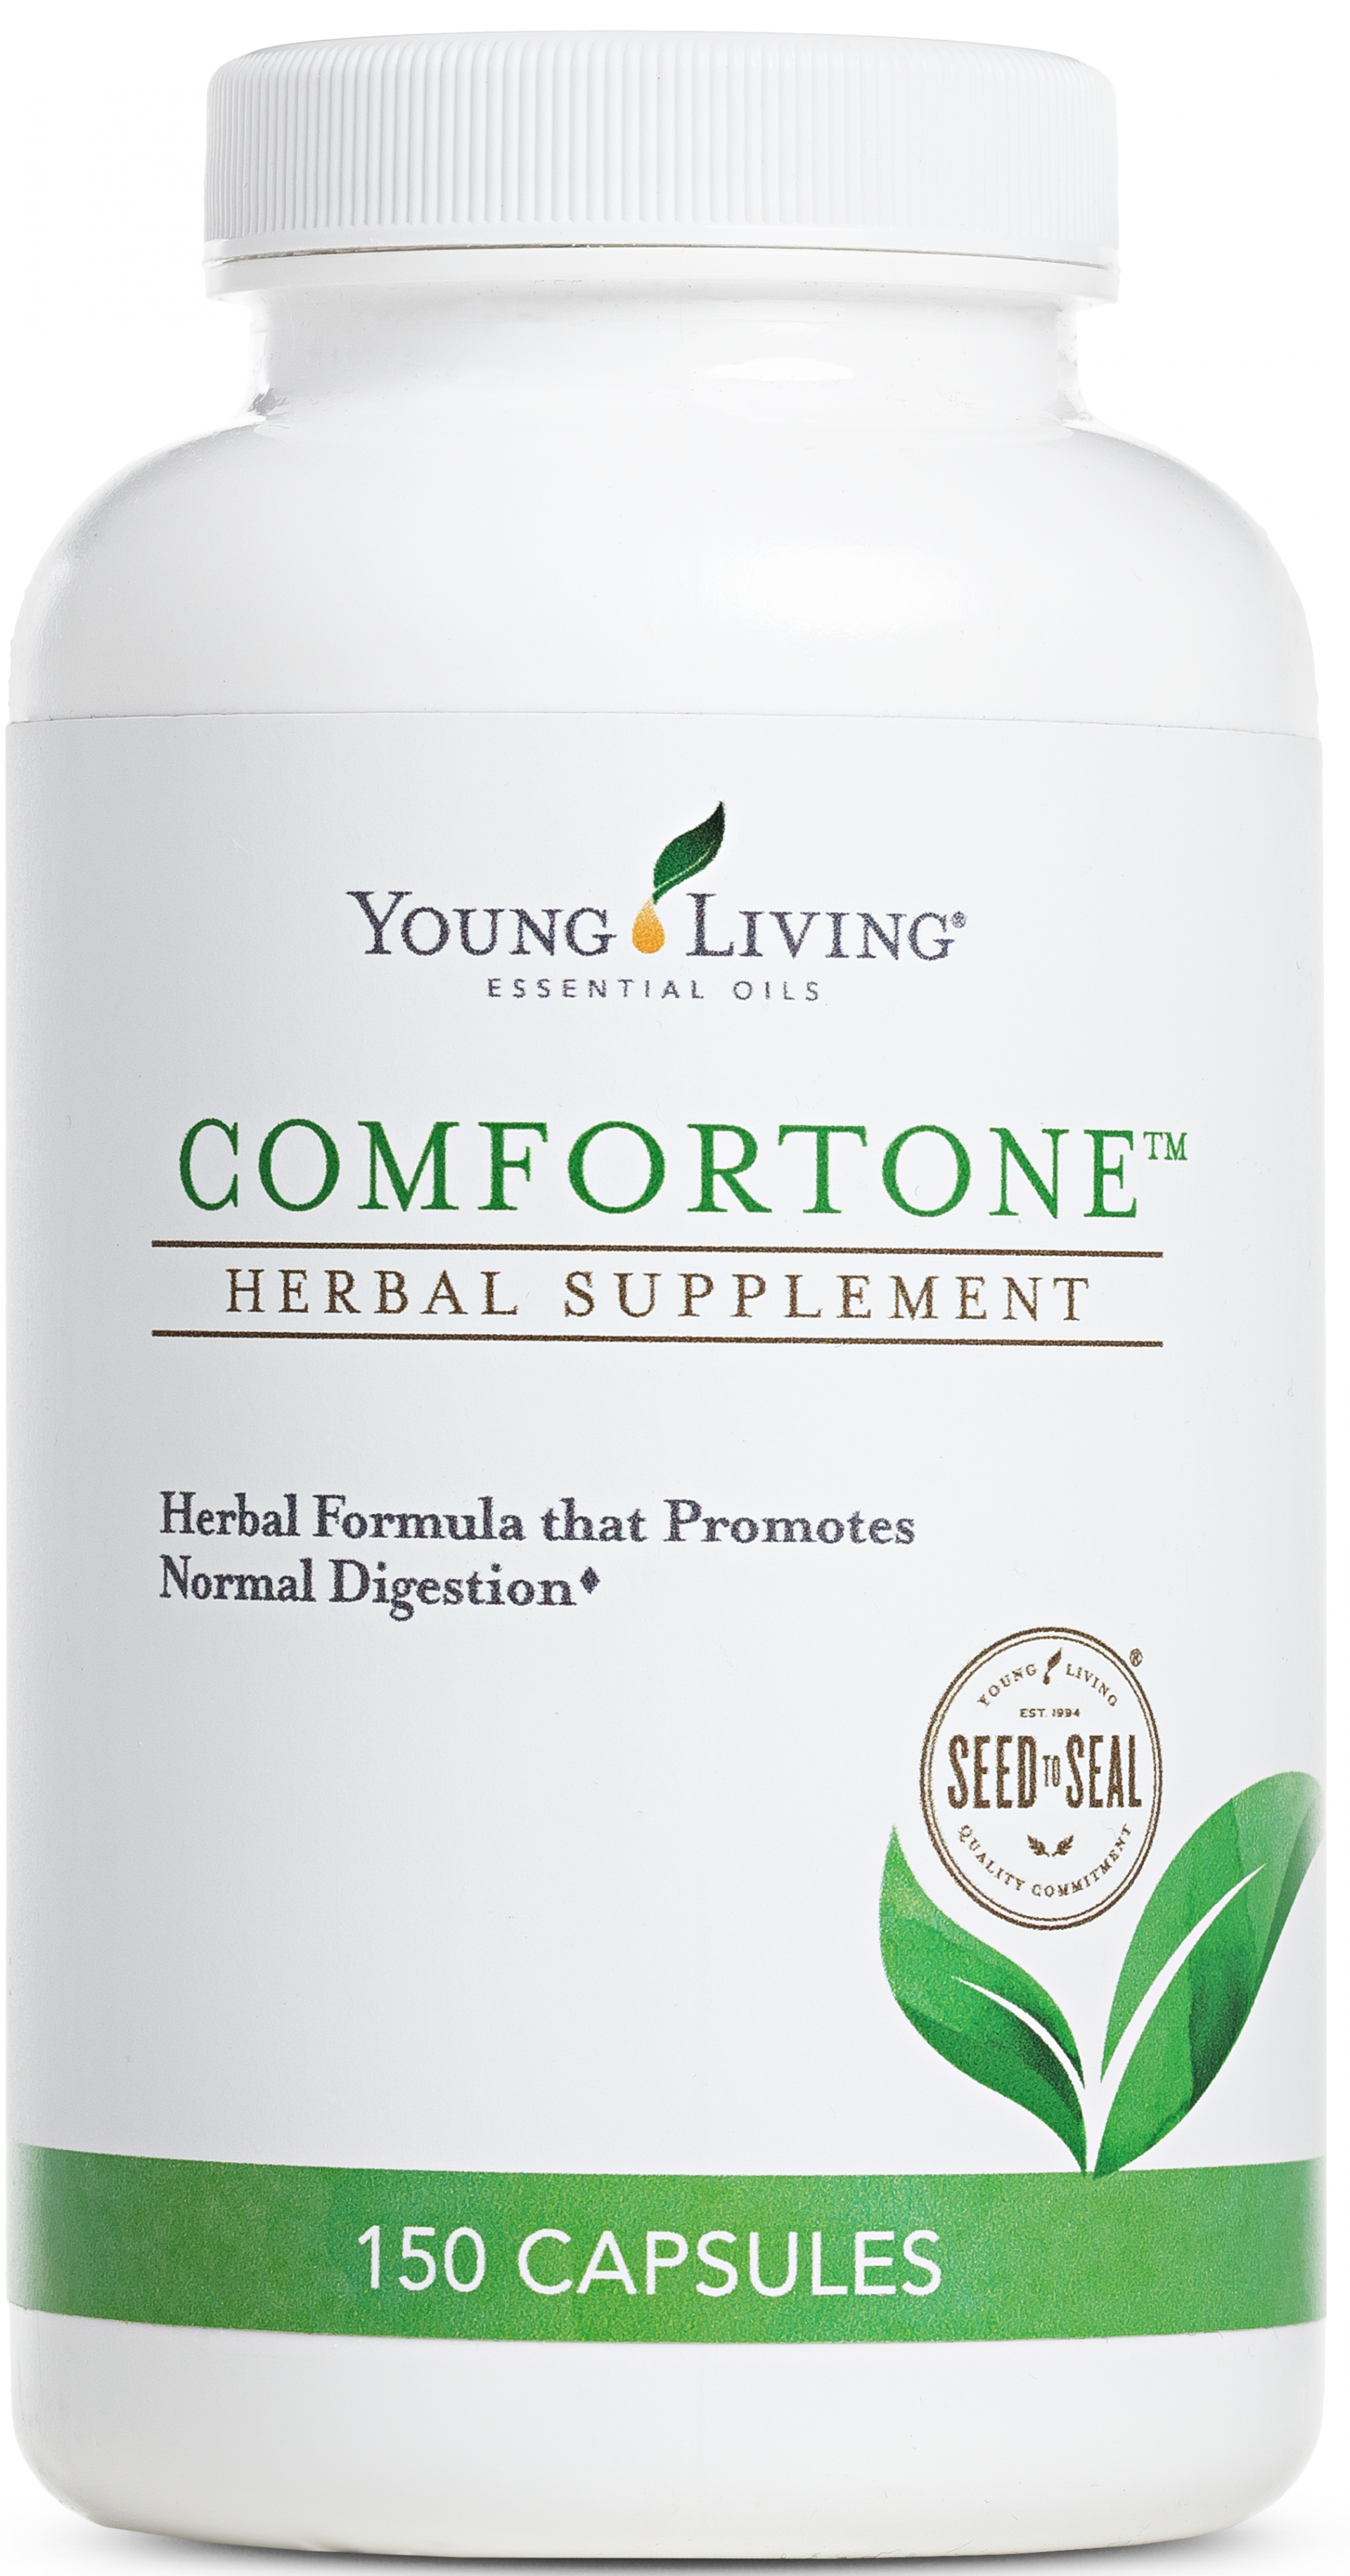 Comfortone Herbal Supplement for Normal Digestion